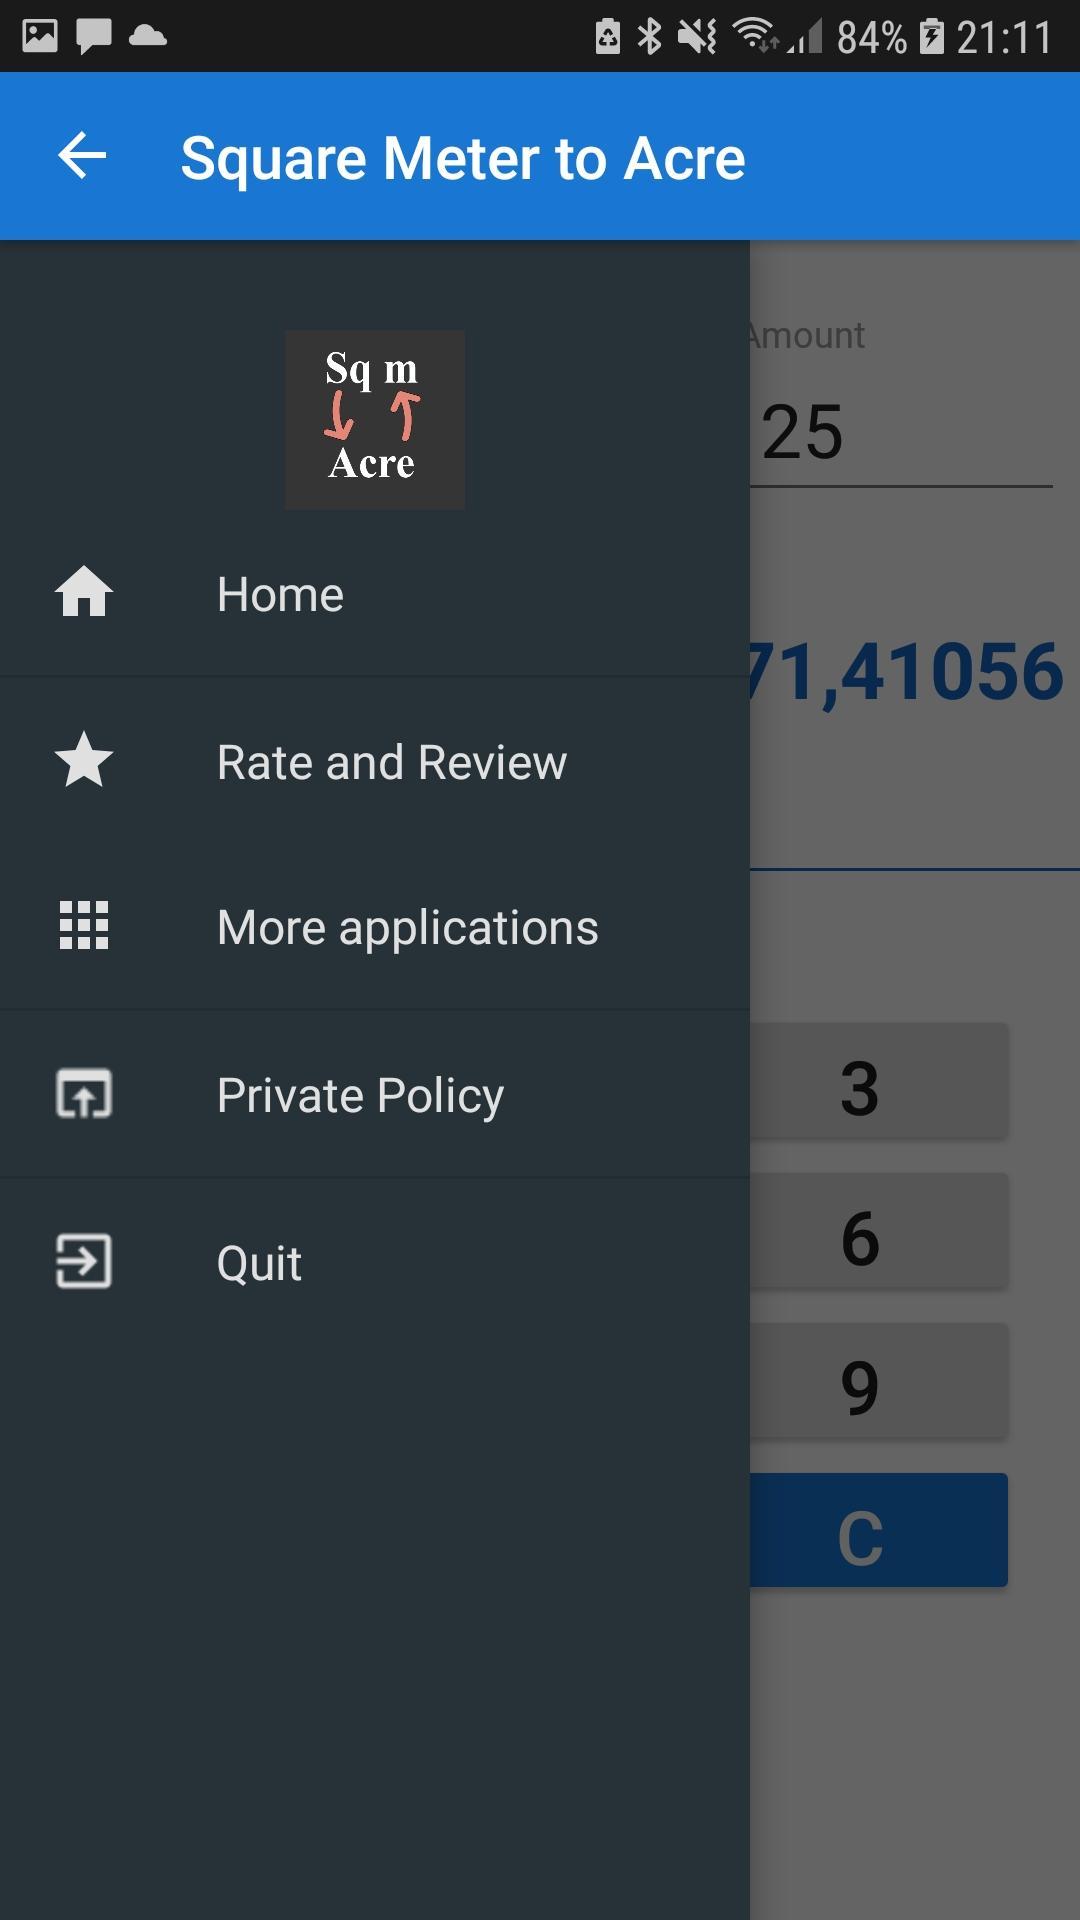 Square Meter to Acre for Android - APK Download